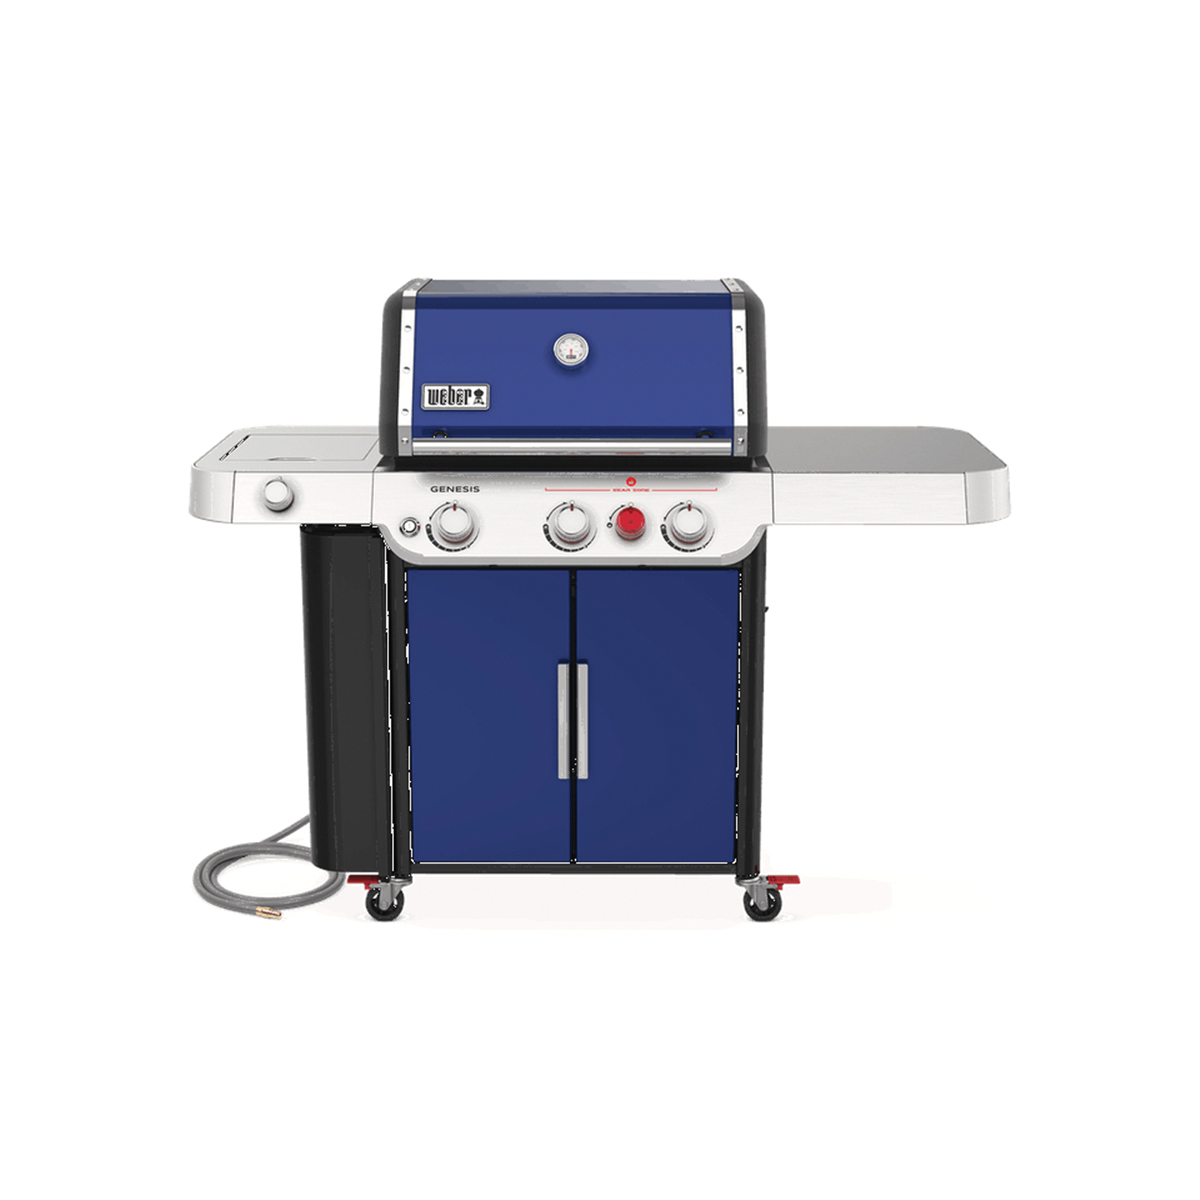 GENESIS E-335 Series 37480001 Gas Grill, 39,000 Btu, Natural Gas, 3-Burner, 513 sq-in Primary Cooking Surface